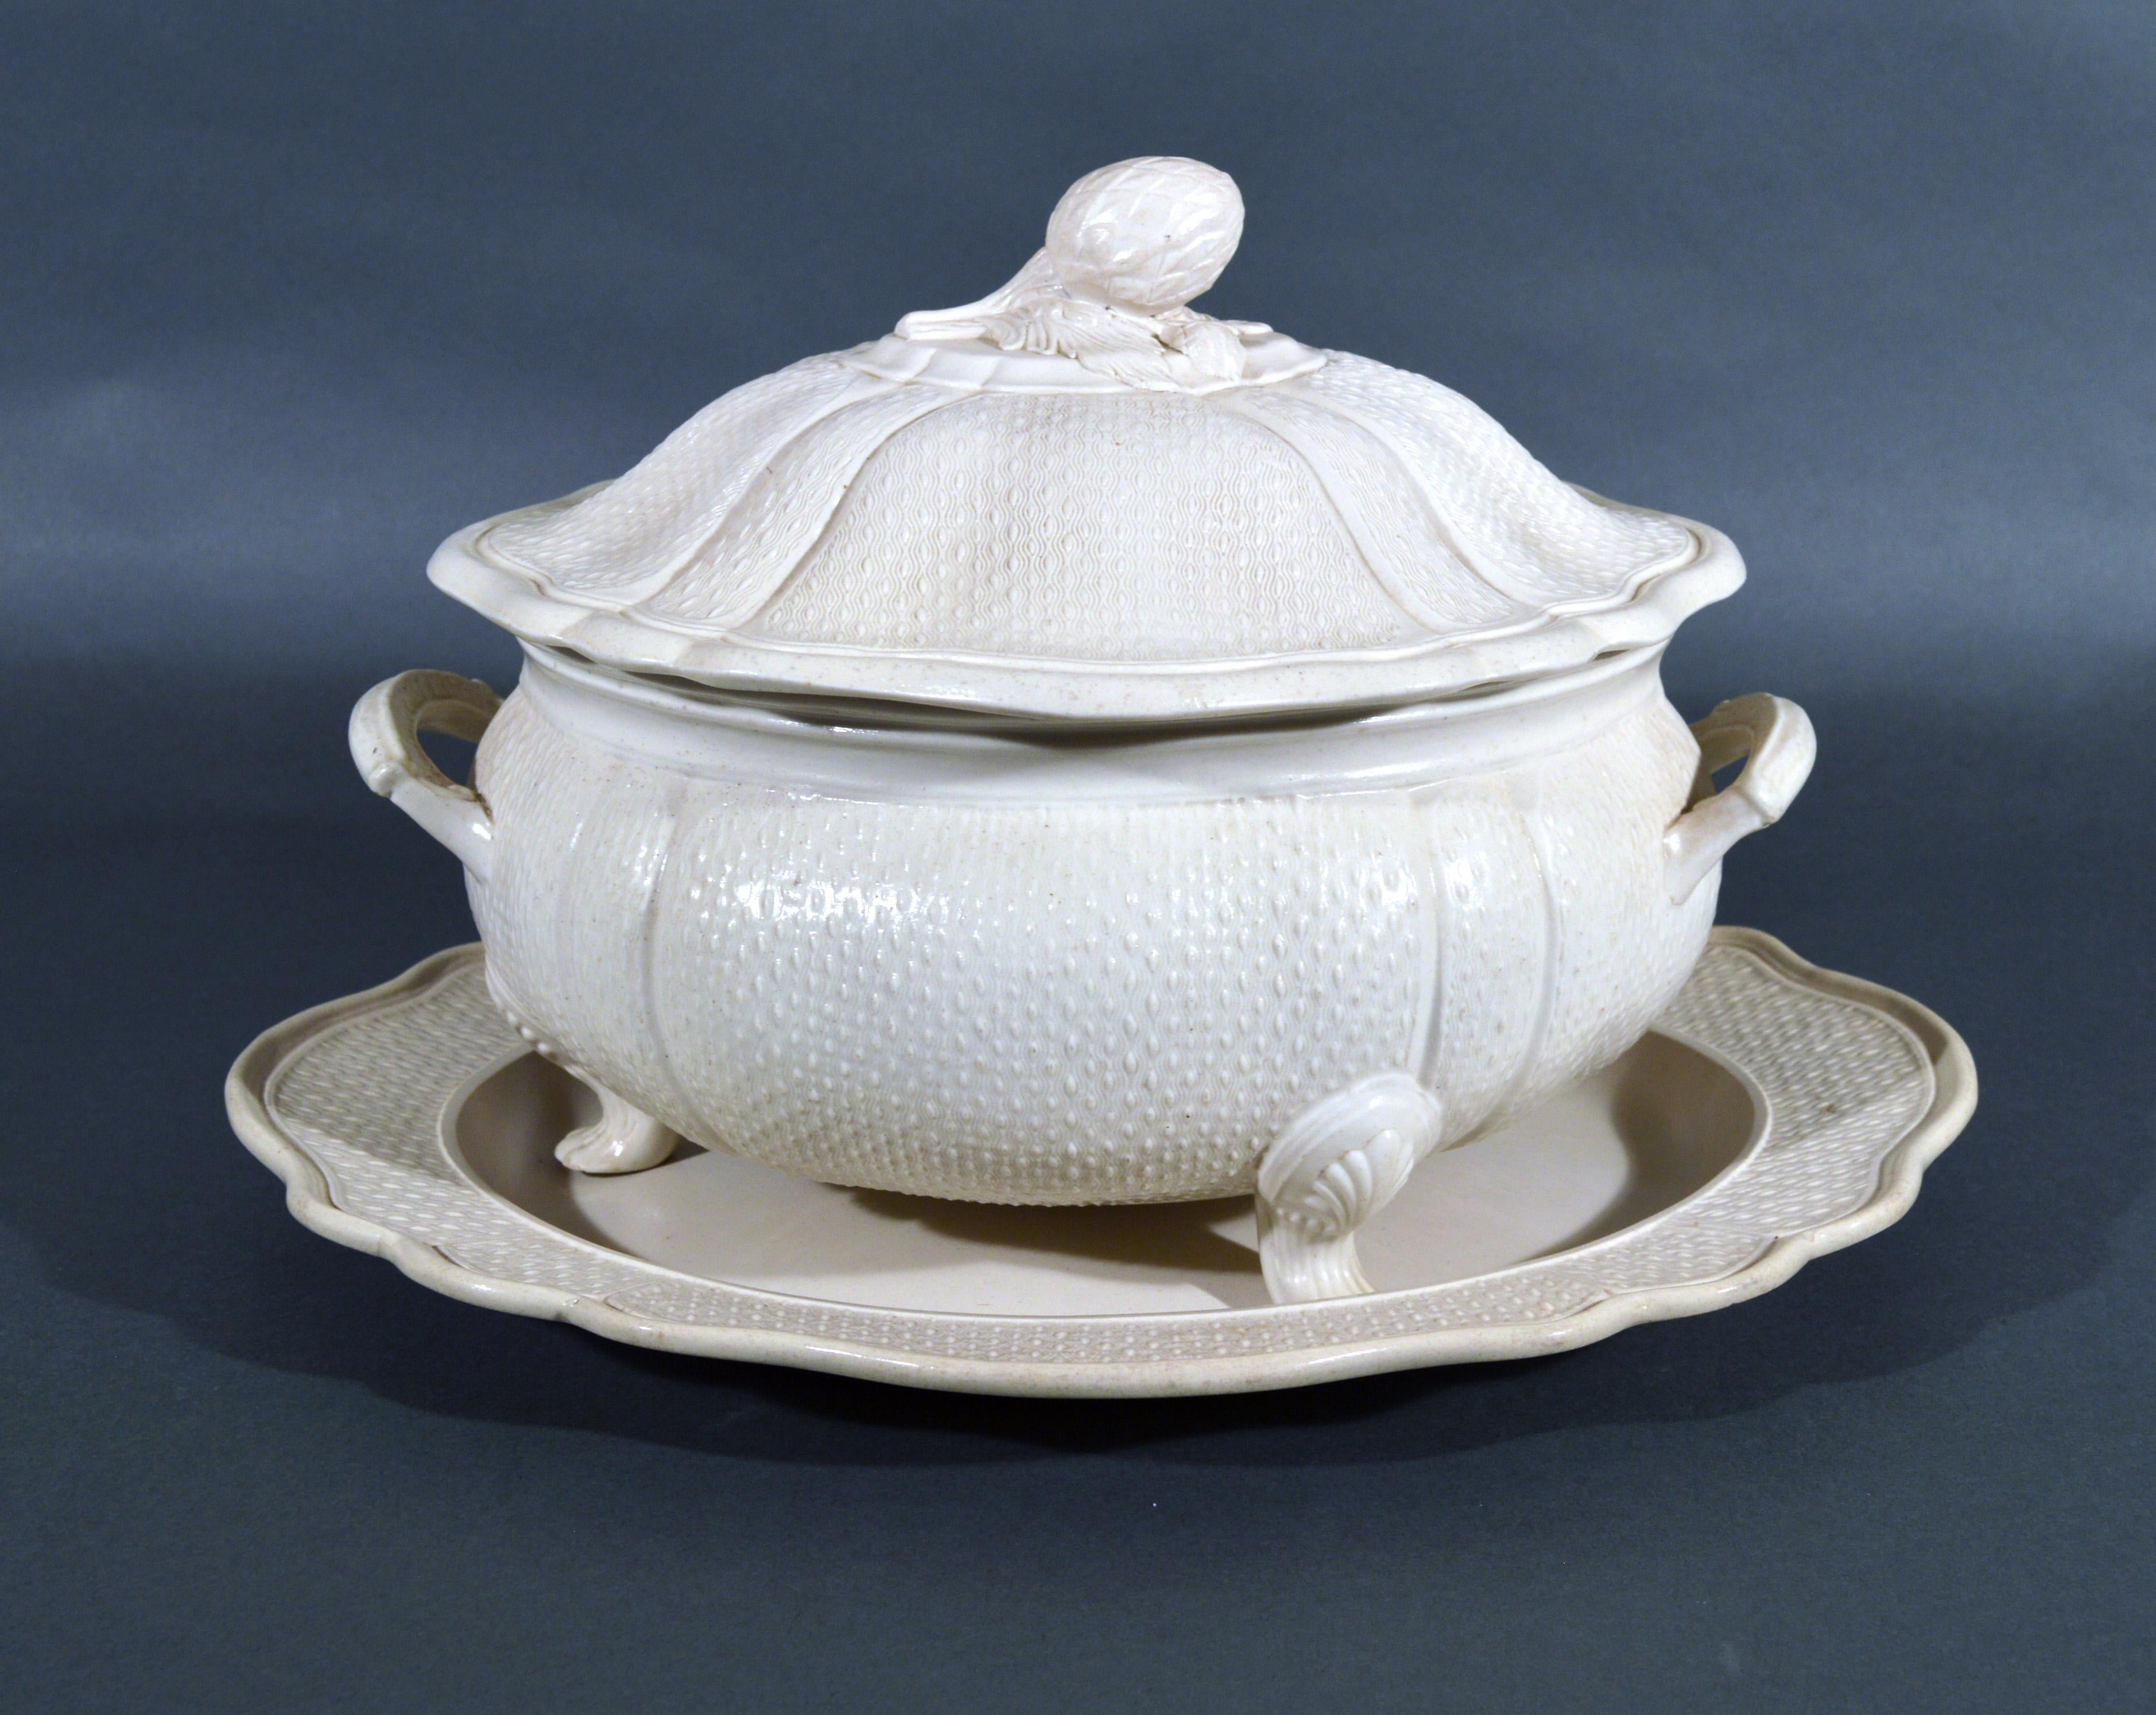 Staffordshire saltglaze stoneware soup tureen, cover and stand,
circa 1760
   
A large plain salt-glazed stoneware soup tureen, cover and stand with molded barley corn or seed design raised on three claw feet with top molded with a large leaf.